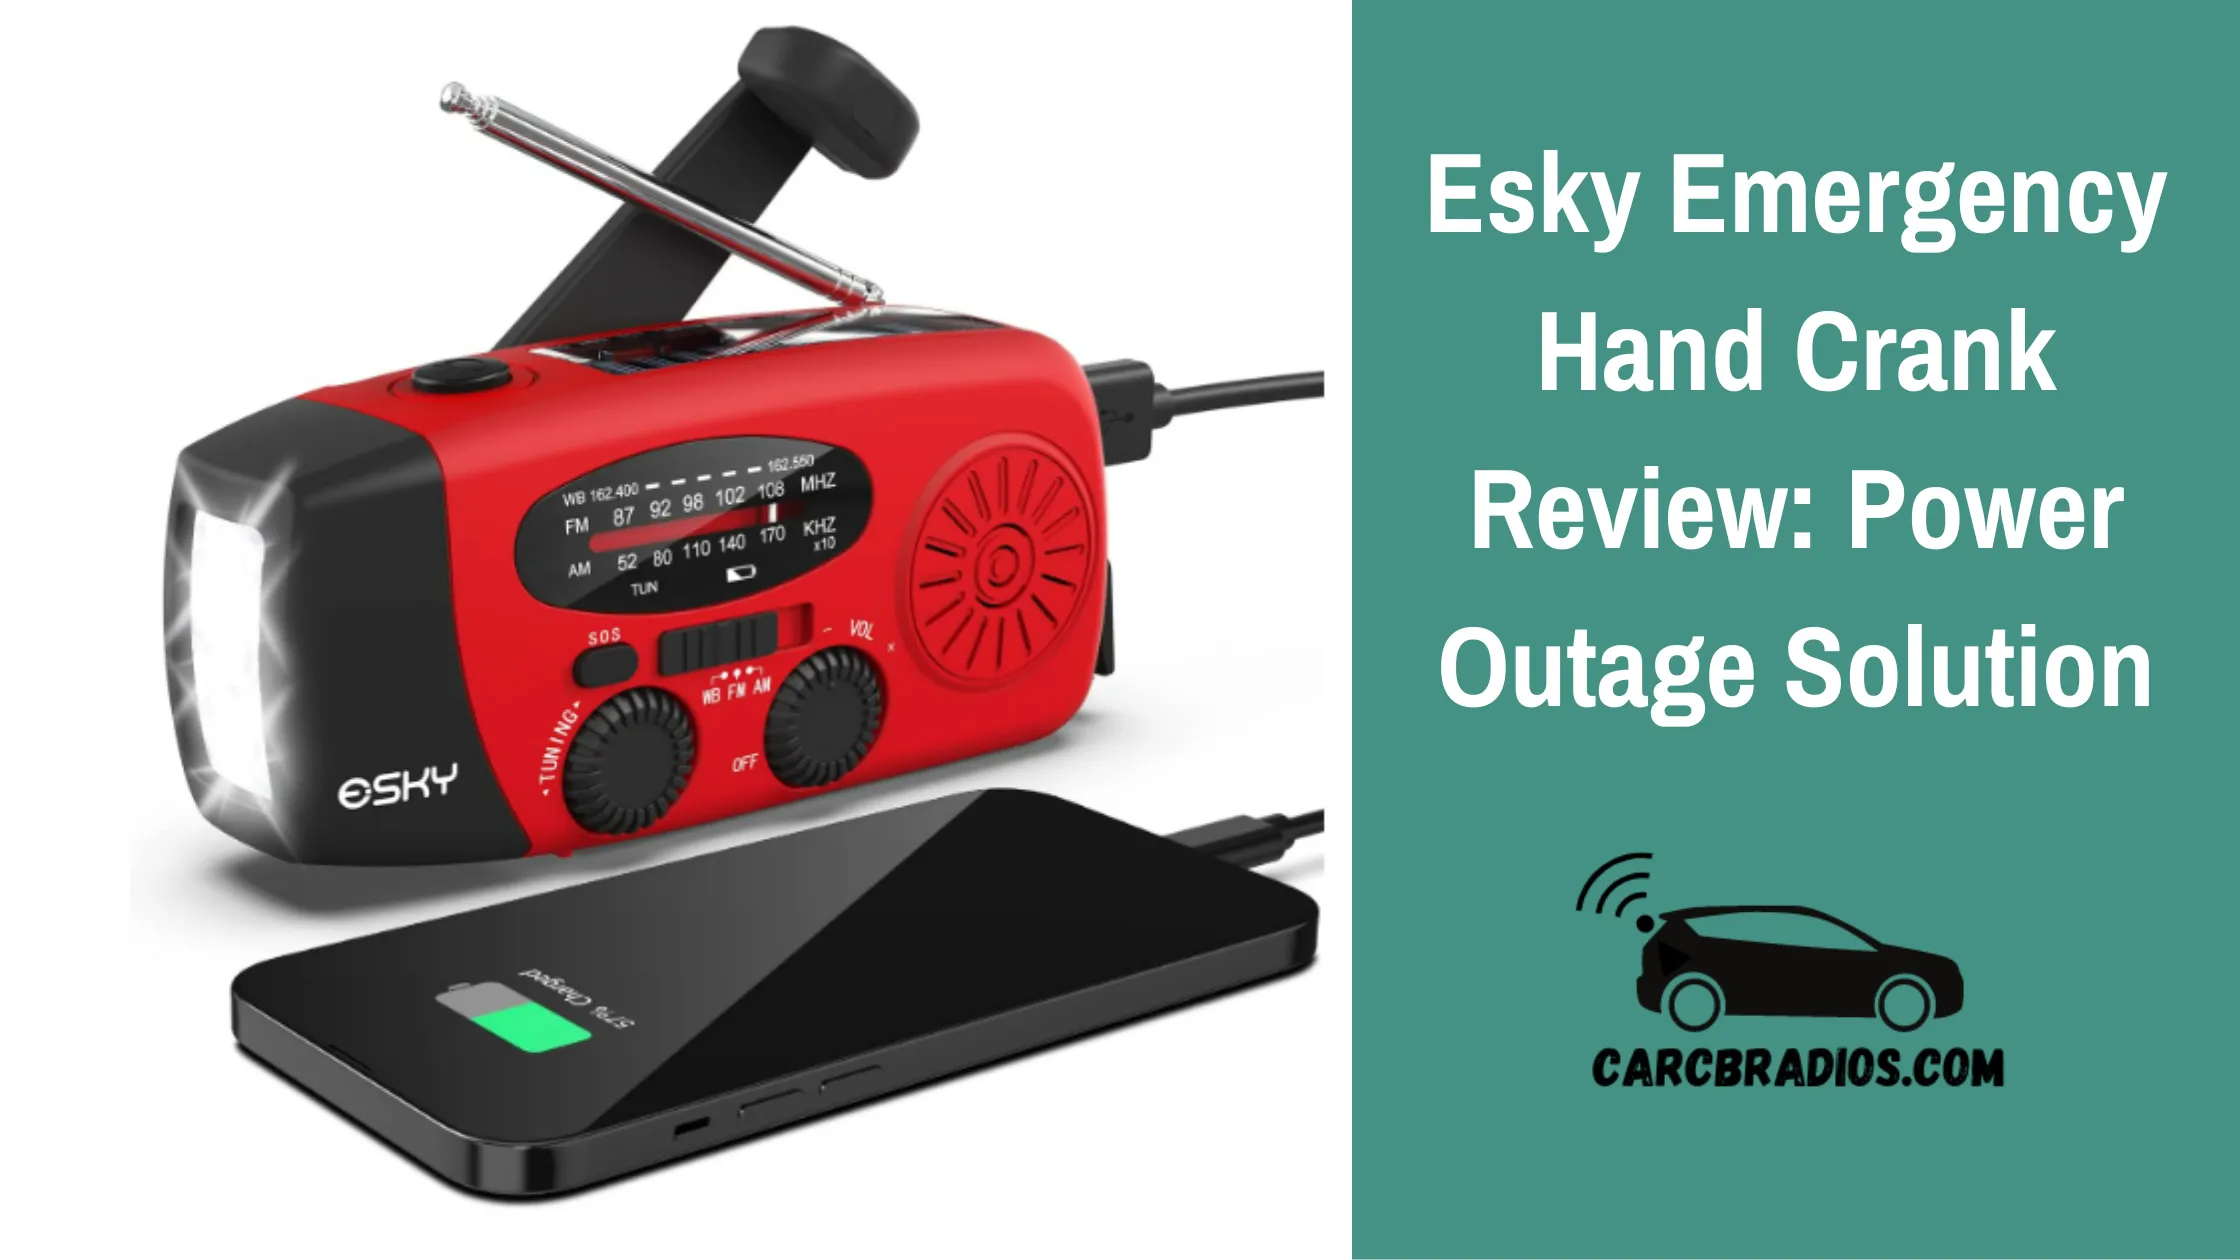 The Esky Emergency Hand Crank Radio is a portable device that offers AM/FM/NOAA radio channels and a built-in flashlight. It can be powered in three ways: by hand-cranking the dynamo, by solar power, or by USB charging. The radio also includes a 2000mAh power bank, which can be used to charge your phone or other devices in an emergency. But does this radio deliver on its promises? Let's find out.